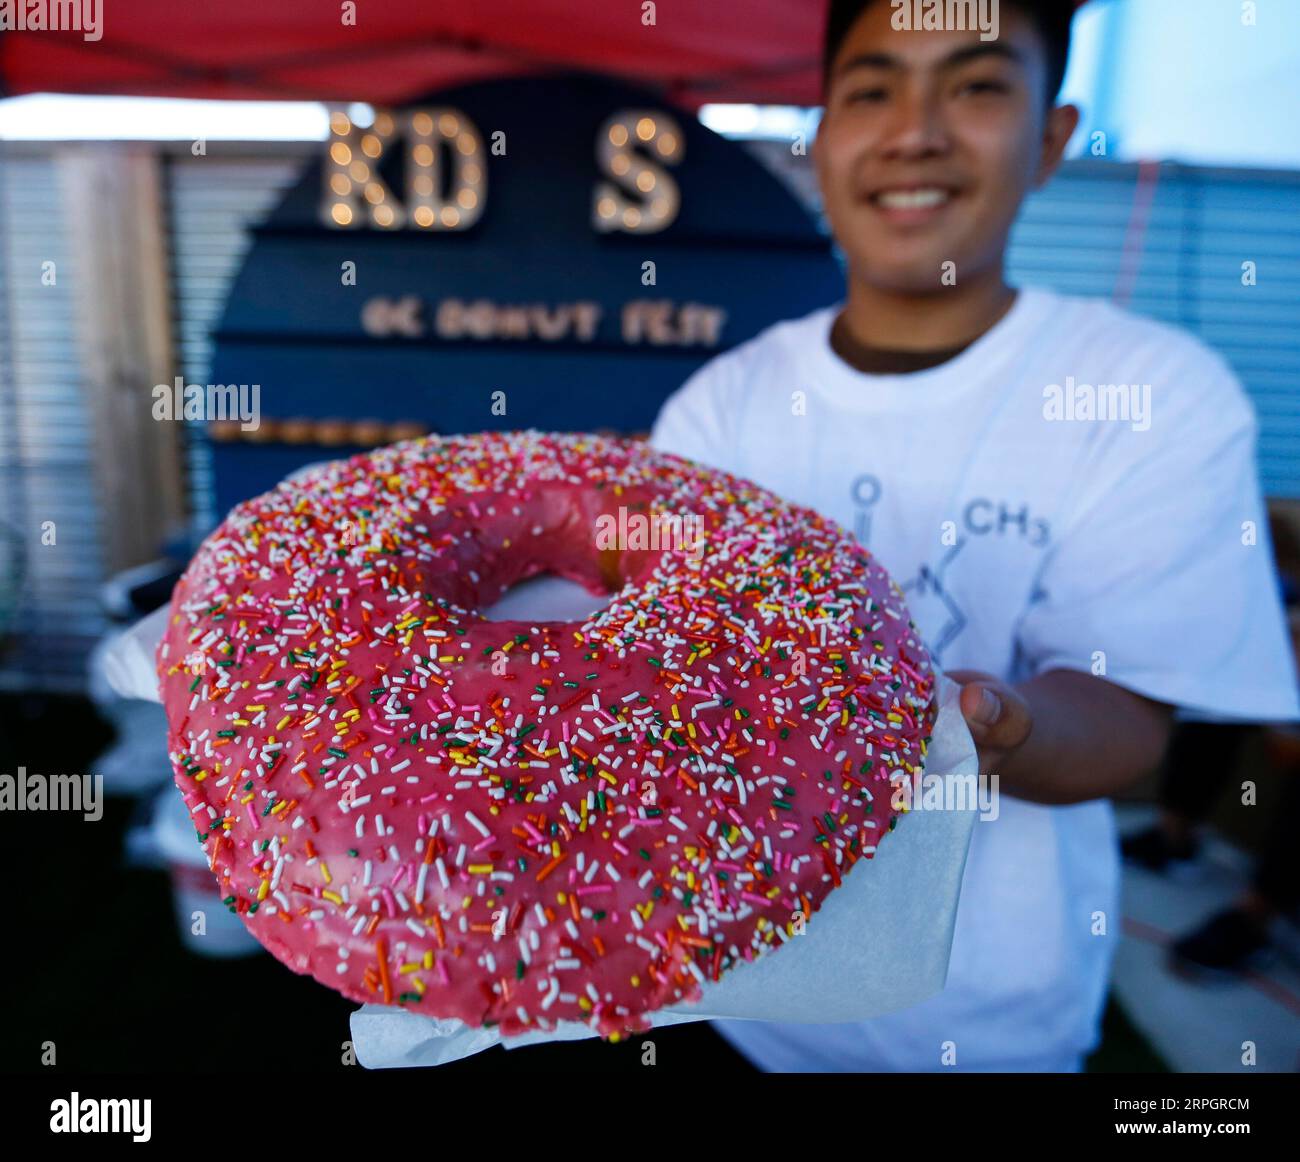 191021 -- ANAHEIM, Oct. 21, 2019 -- A vendor shows a giant donut at the Donut Festival Orange County held in Anaheim, the United States, Oct. 20, 2019. People enjoyed different kinds of donuts and drinks at the festival held on Sunday.  U.S.-CALIFORNIA-ANAHEIM-DONUT FESTIVAL LixYing PUBLICATIONxNOTxINxCHN Stock Photo